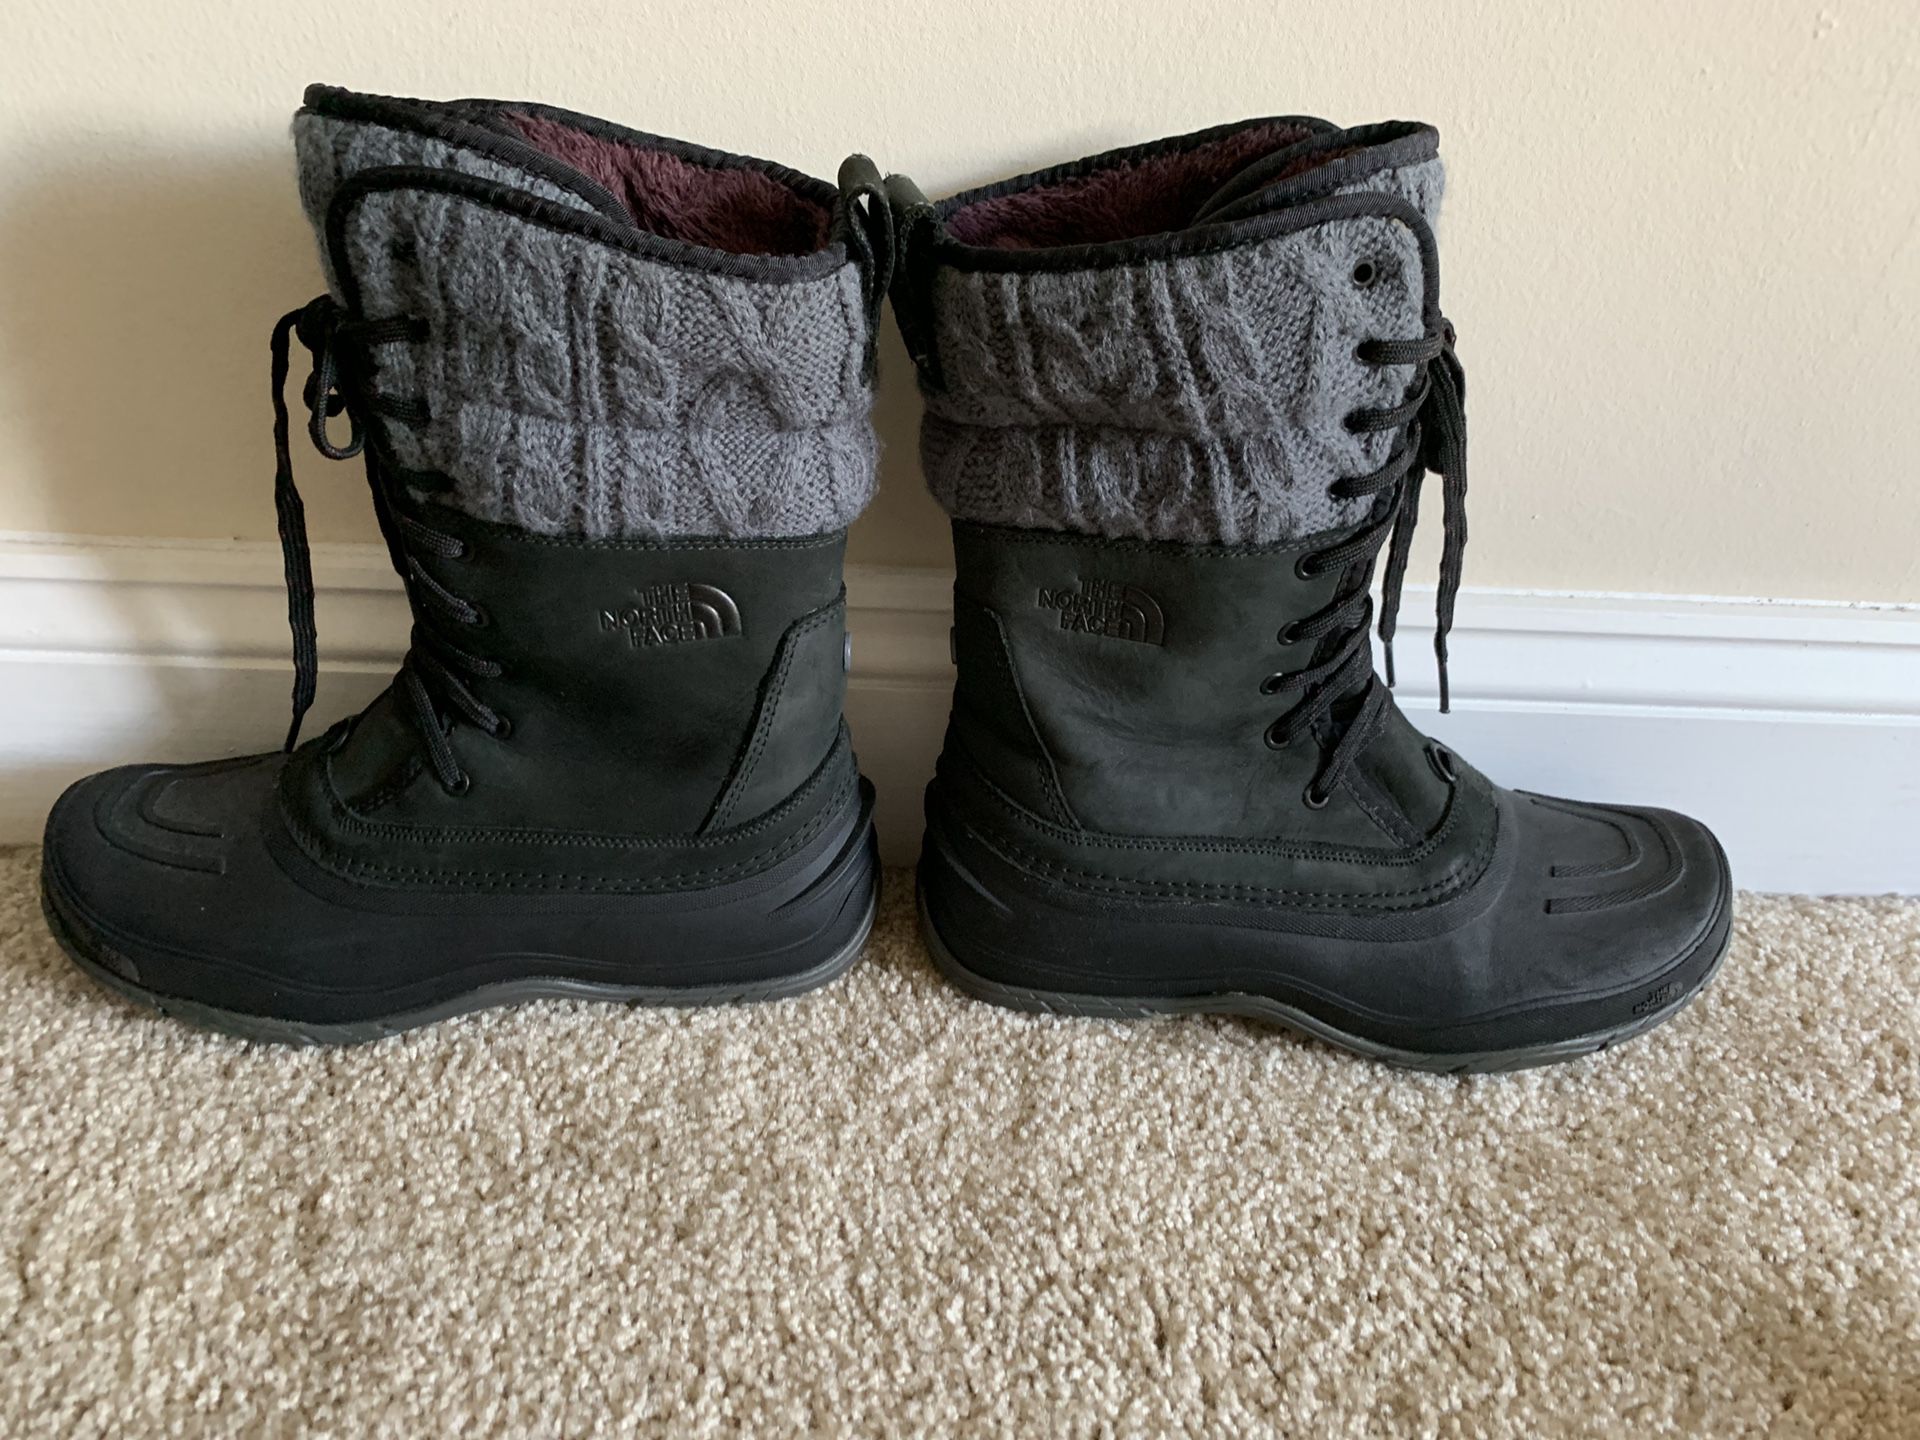 North Face women’s snow boots